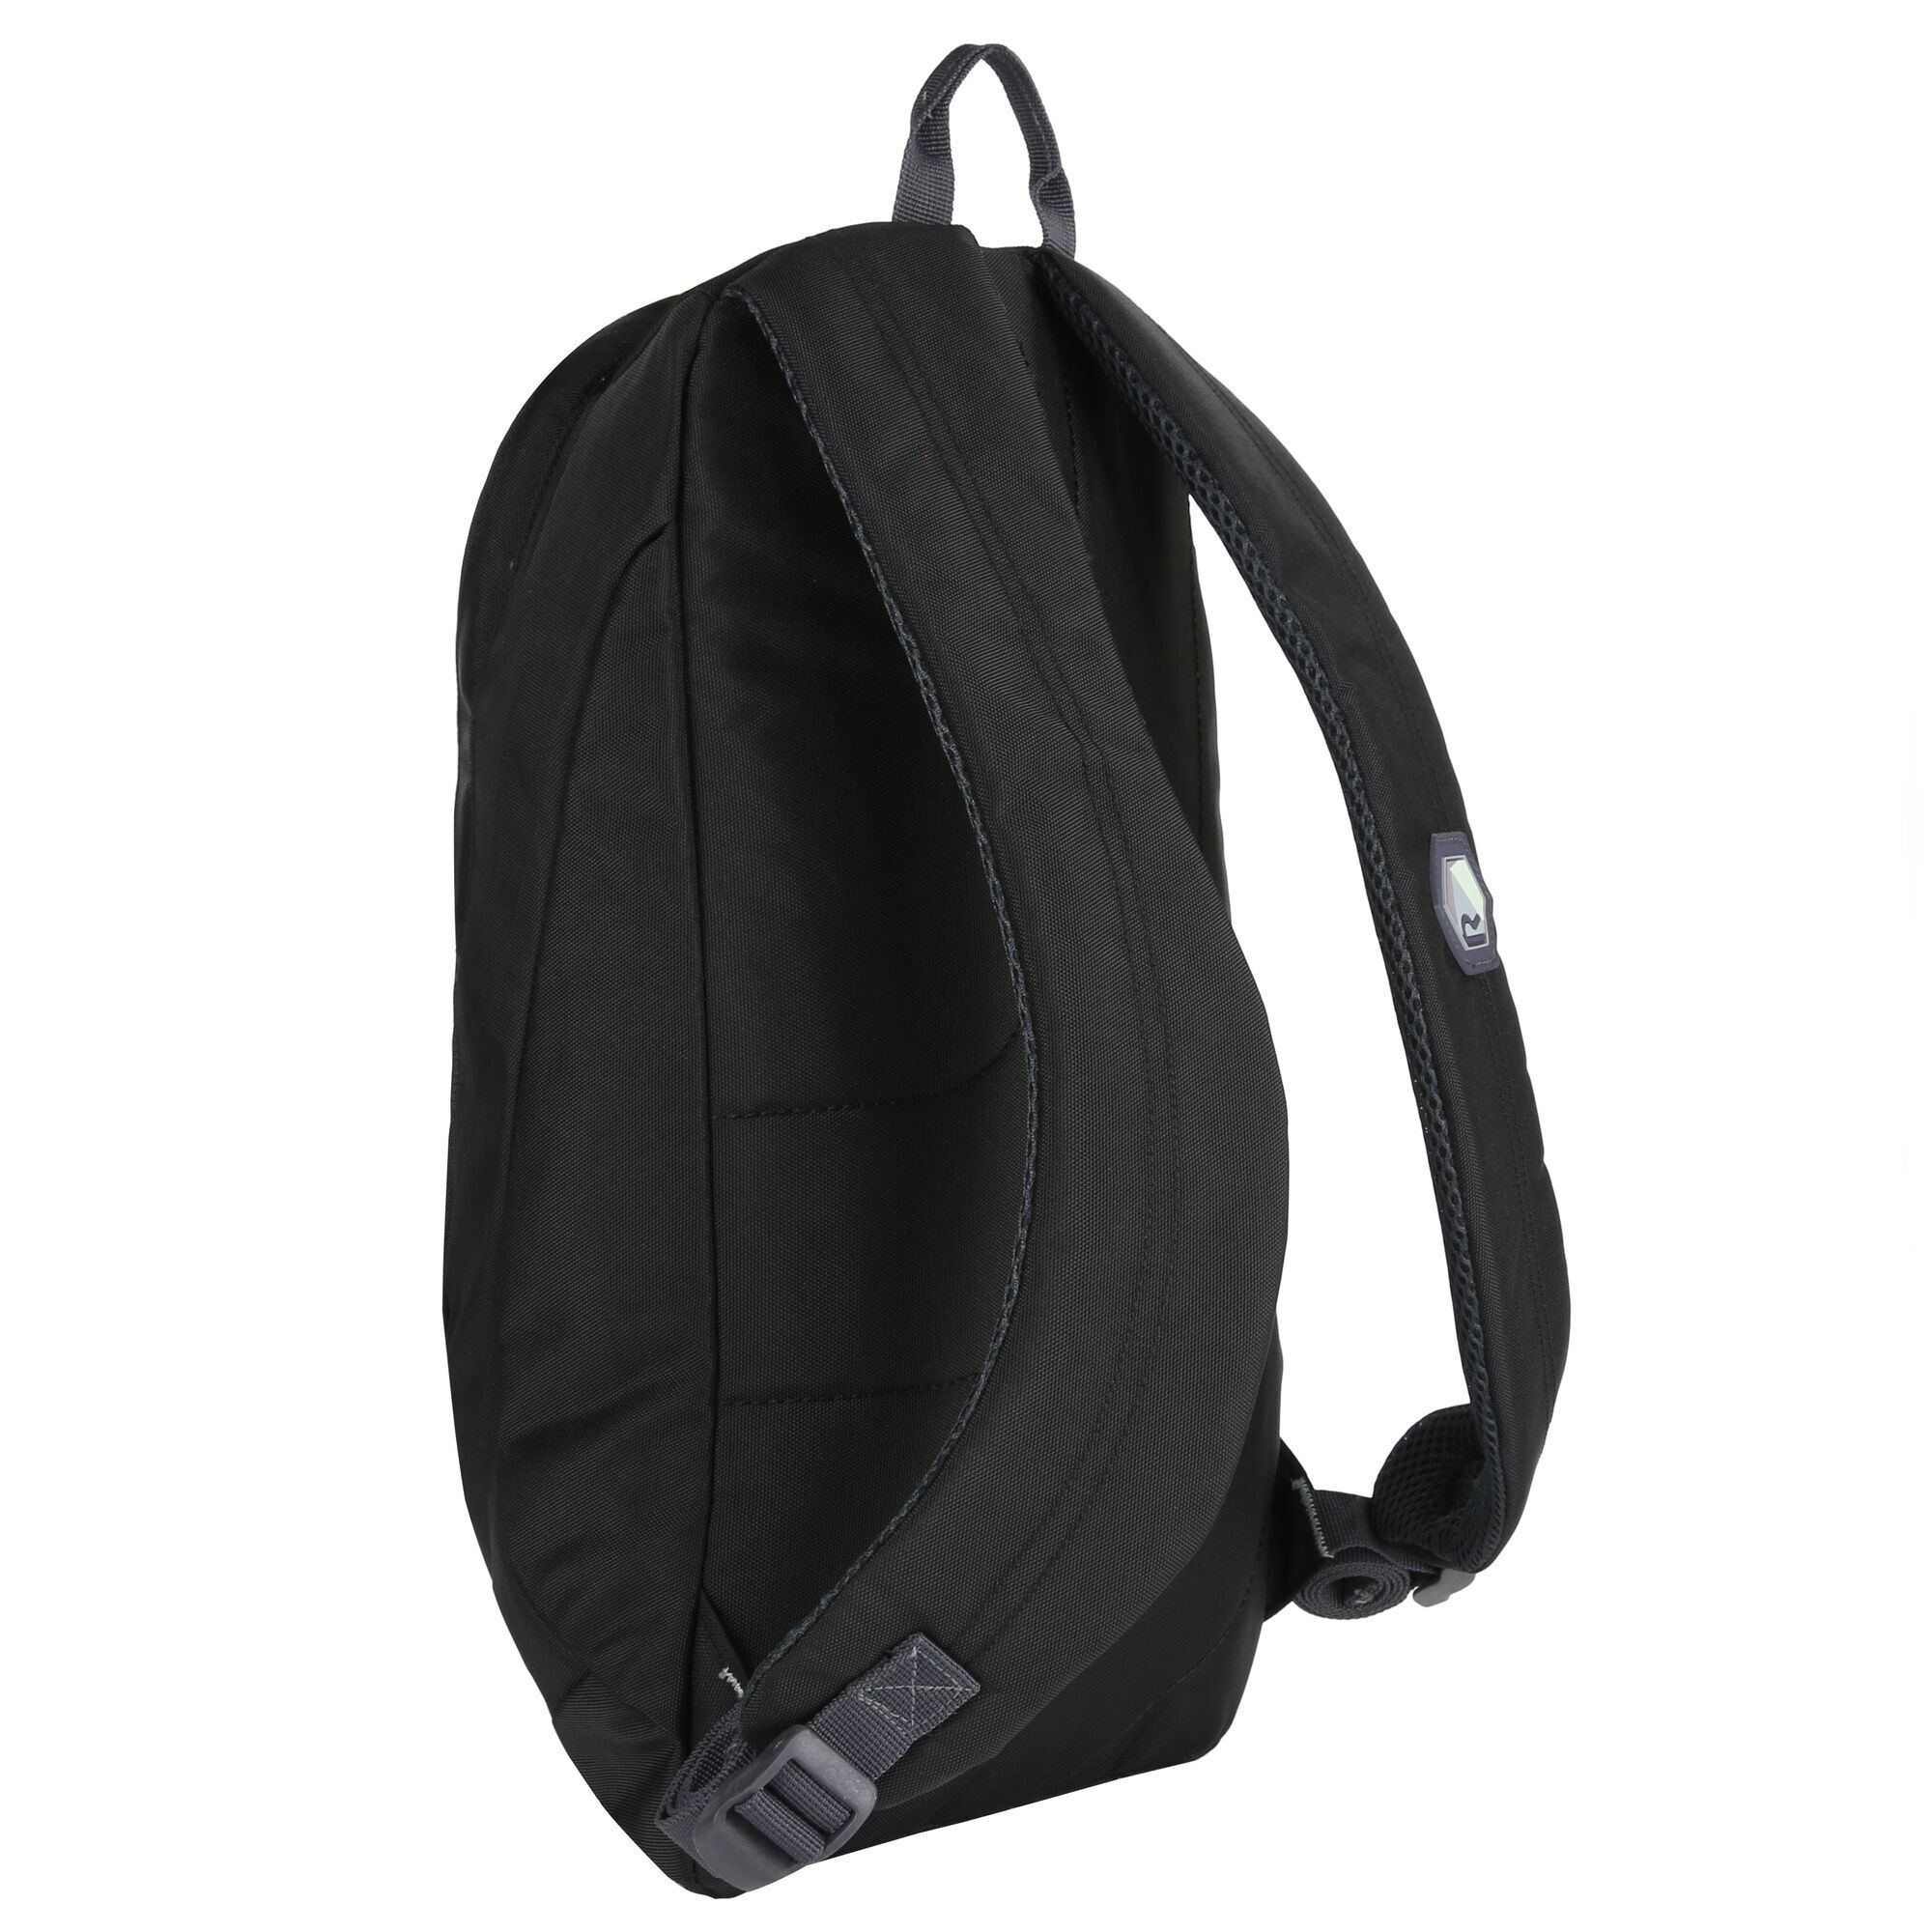 15L capacity. Made from hardwearing 600D polyester fabric with air mesh straps and plenty of pockets for organising belongings. Front storage pocket. Internal security pocket. Easy grab zip pullers.